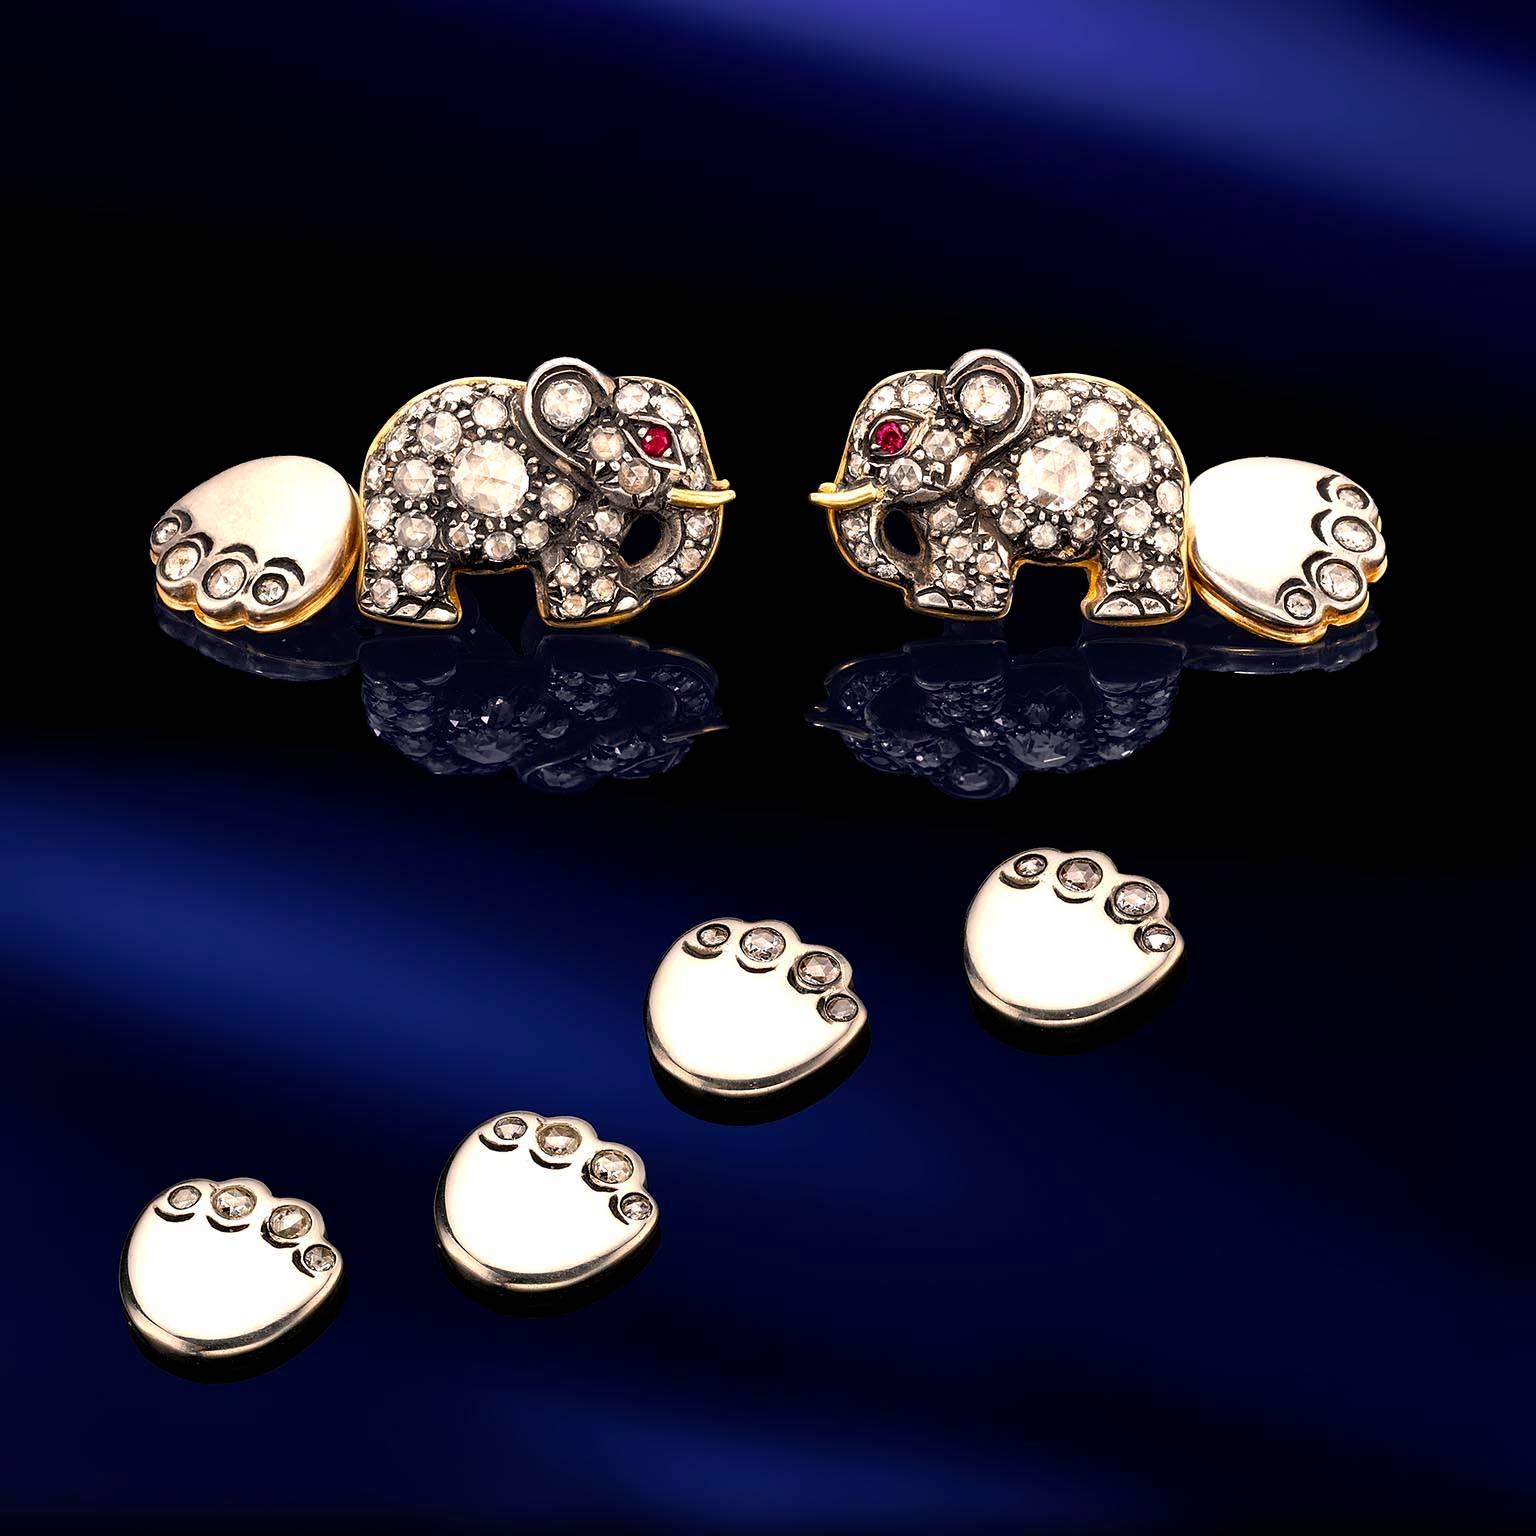 Ruby eyed "Elephants” Cuff Links and studs set carrying 4.5 carats of diamonds set in 18 karat gold toped with sterling silver.
With instructions assured on reverse: “Left Hand”, “Right Hand”.
Brand New Never Been Worn.